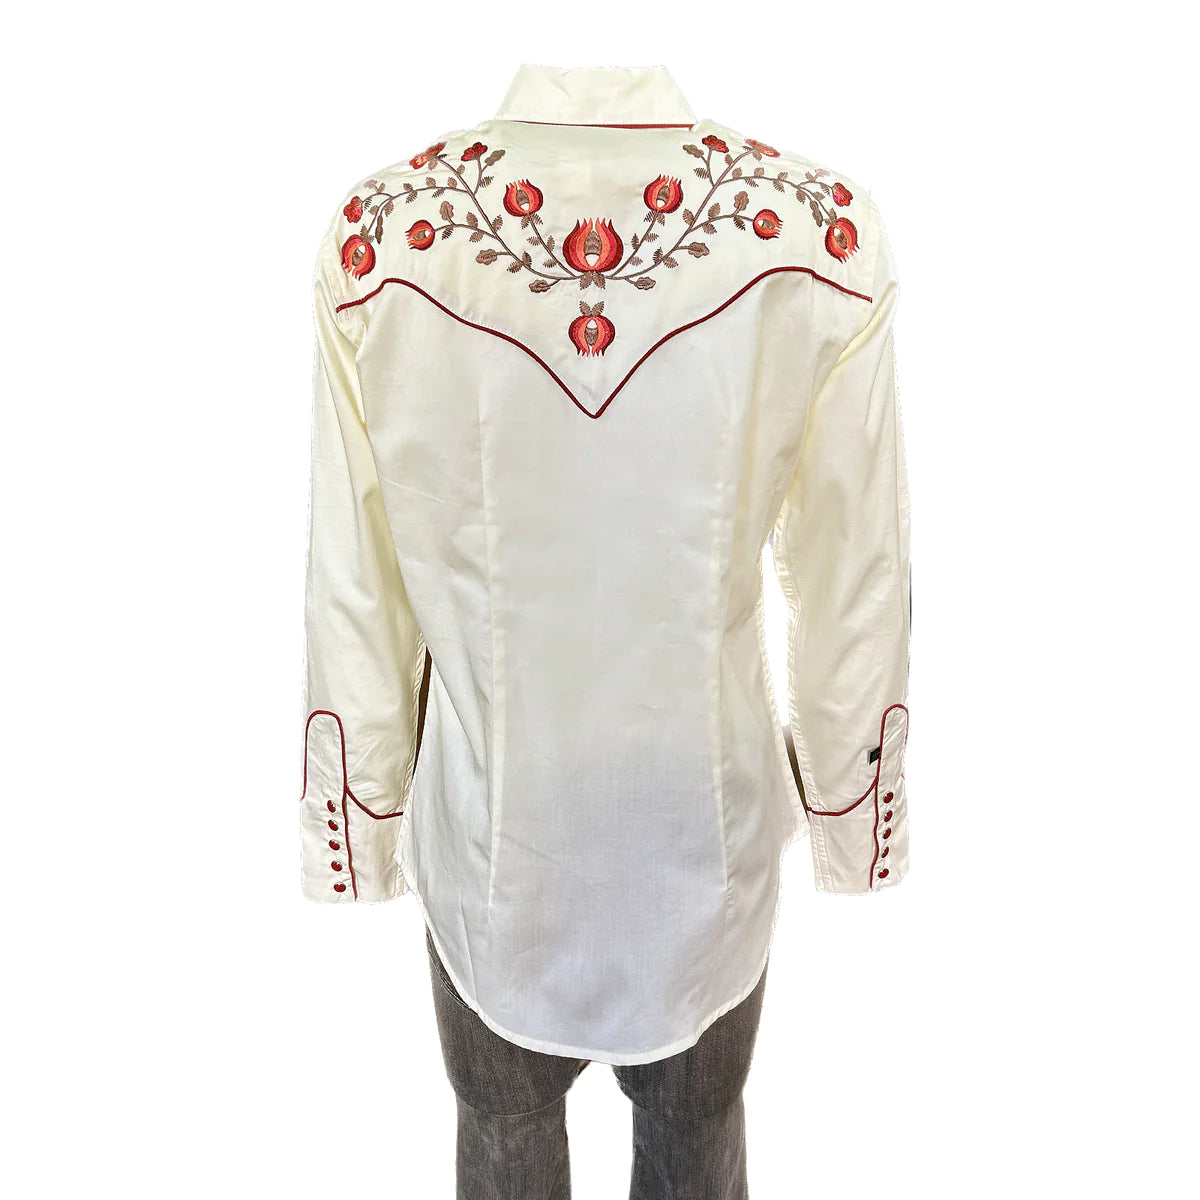 Rockmount Ranch Wear Ladies Vintage Inspired Western Shirt with Thistle Embroidery Ivory Front